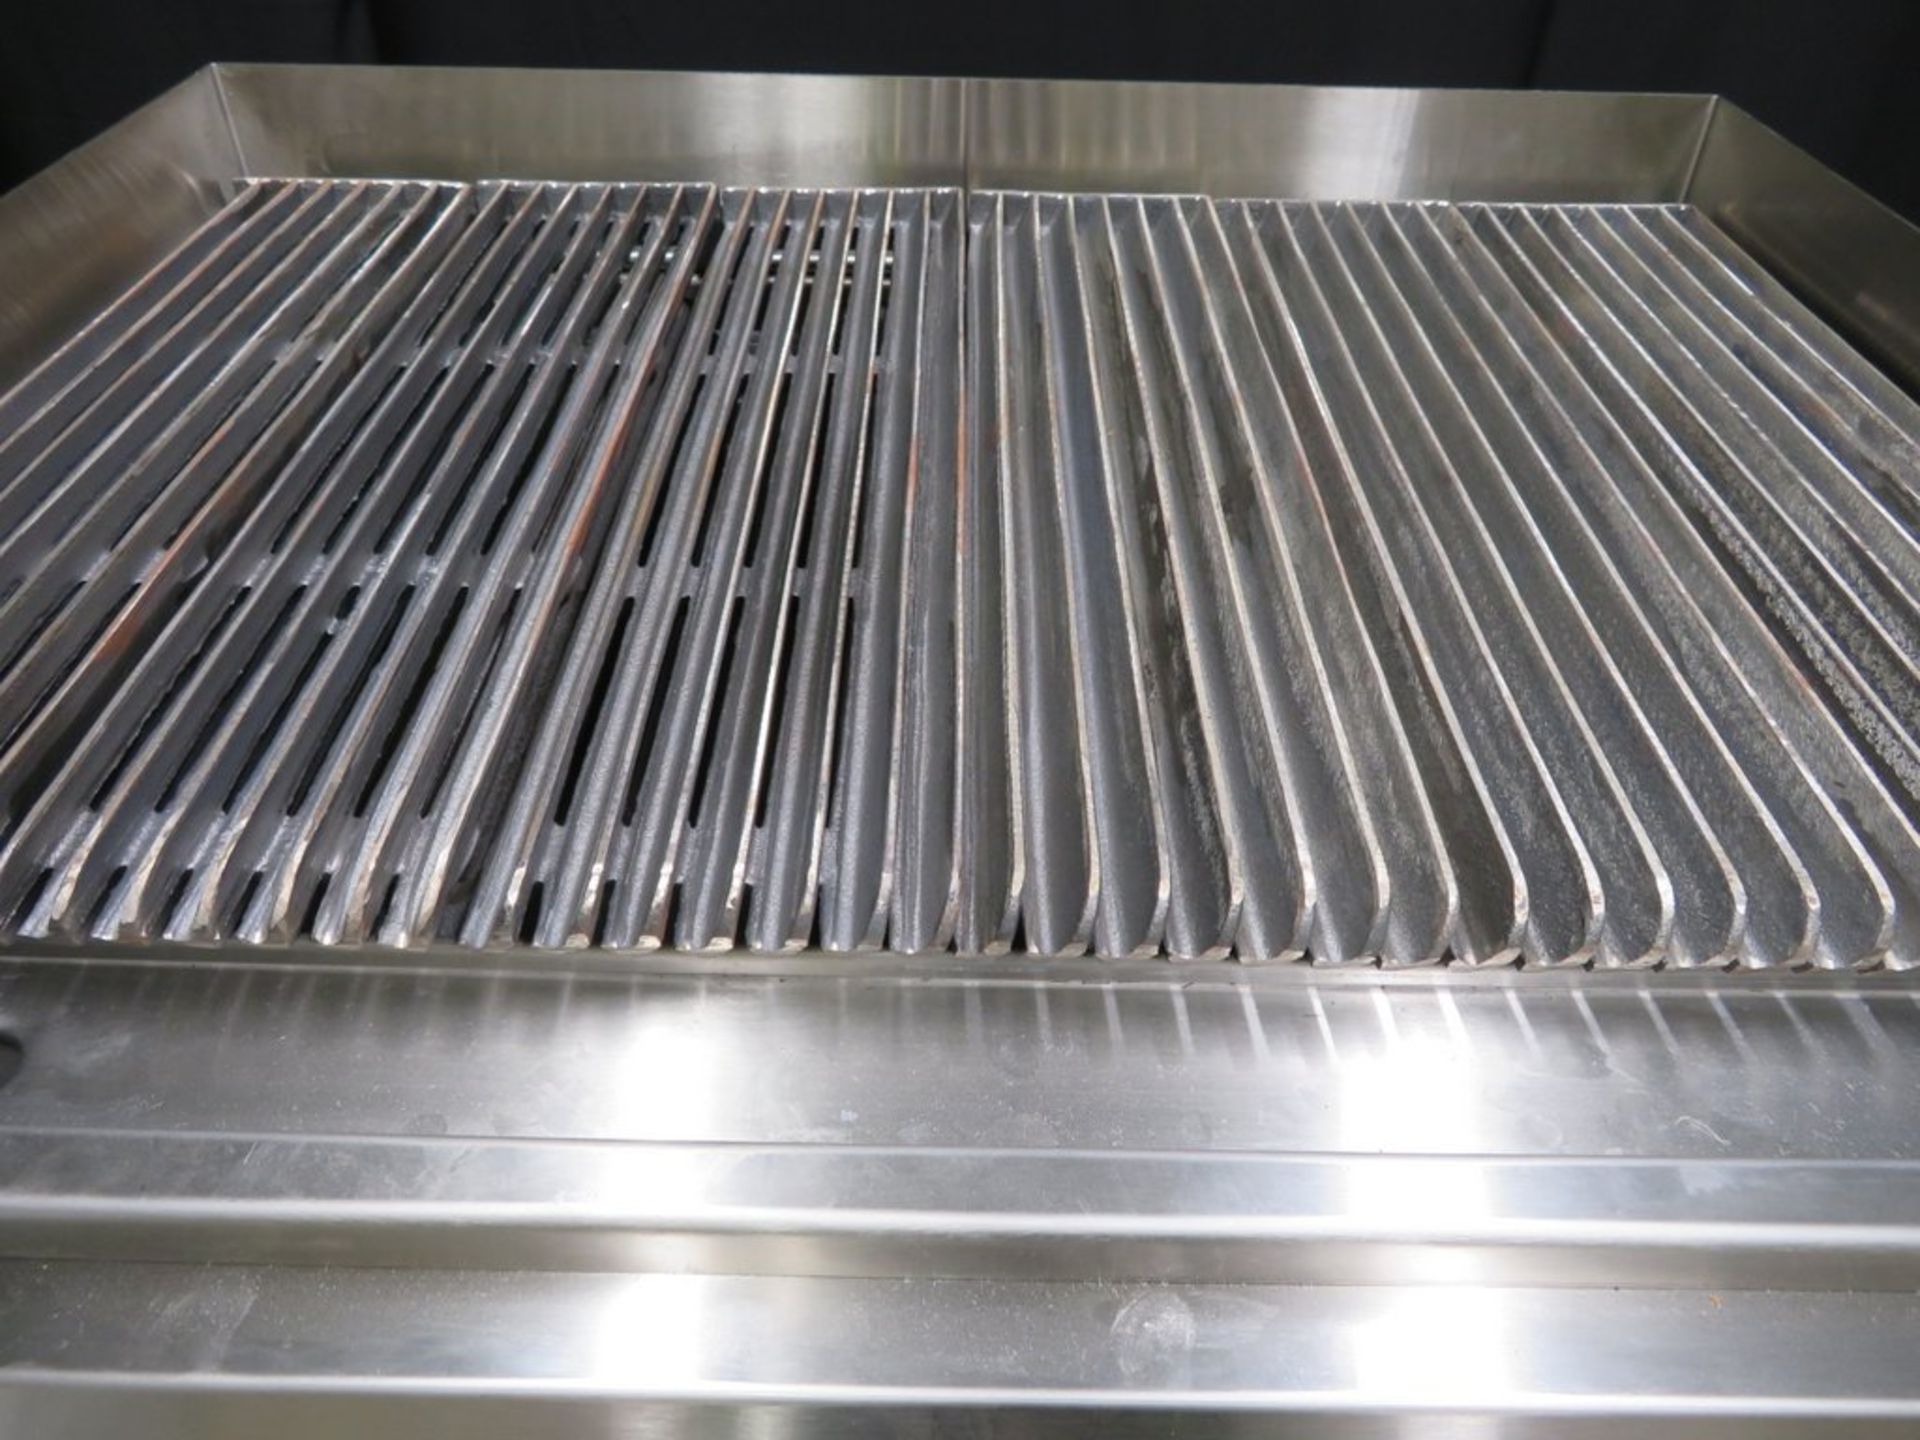 Heavy duty radiant chargrill with humidity feature, model G7V200G, gas, brand new no box - Image 5 of 12